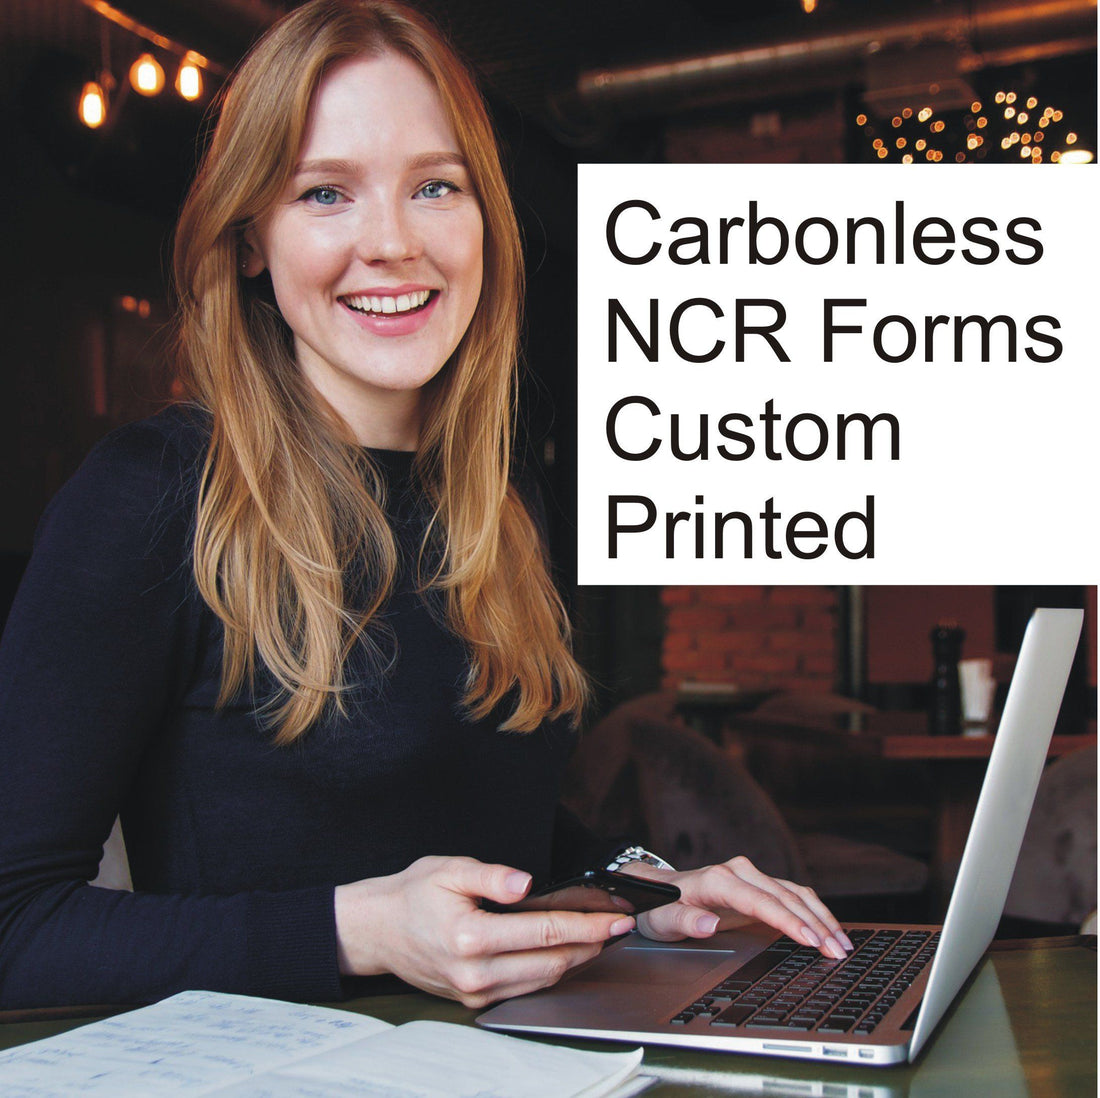 What are Carbonless NCR Forms?